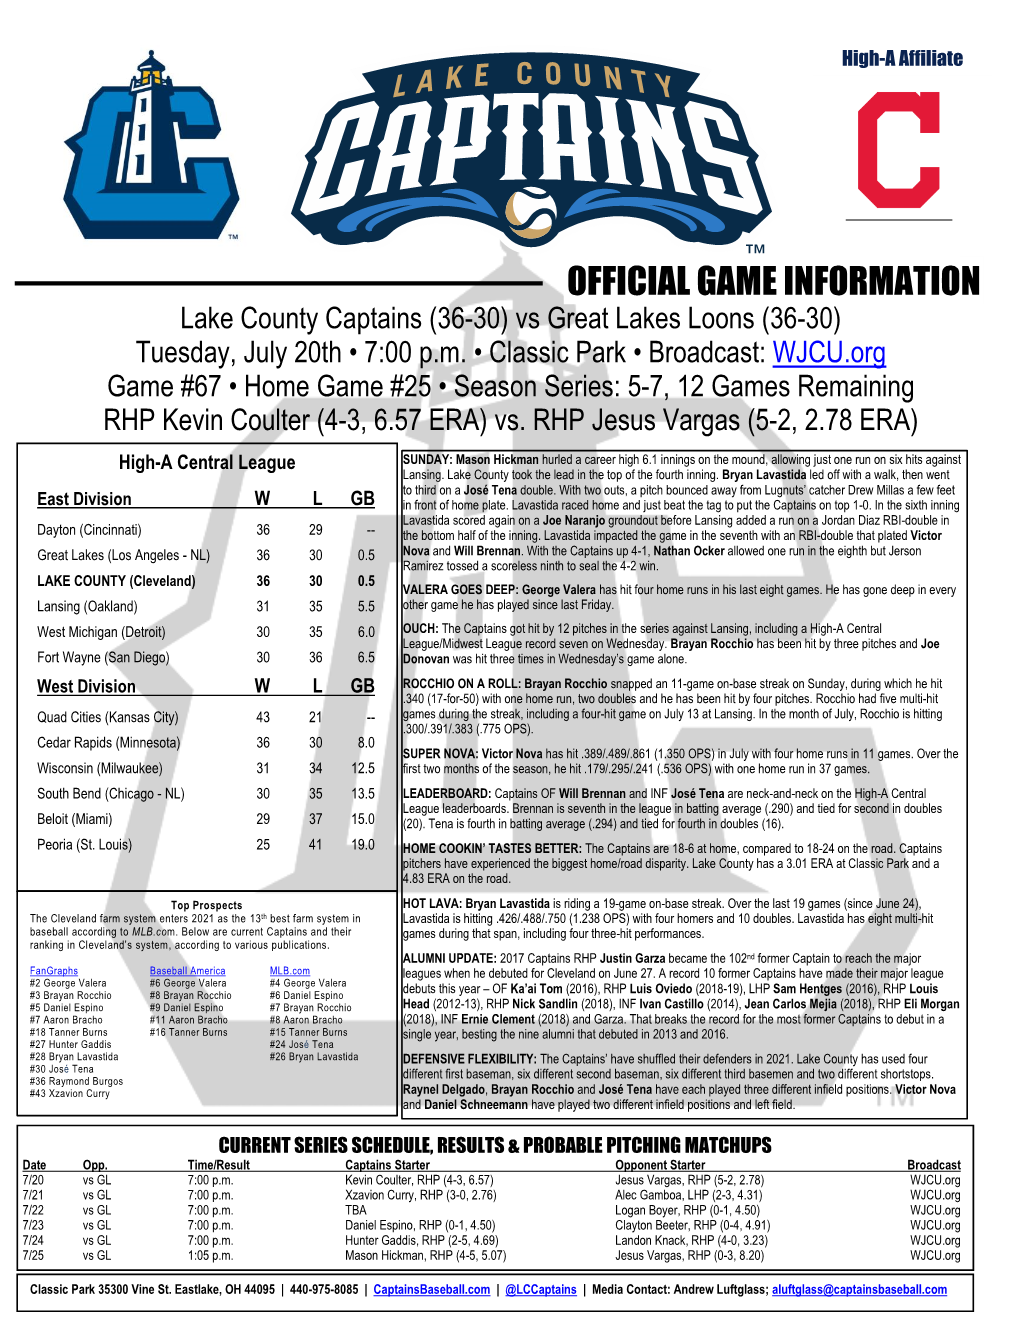 OFFICIAL GAME INFORMATION Lake County Captains (36-30) Vs Great Lakes Loons (36-30) Tuesday, July 20Th • 7:00 P.M